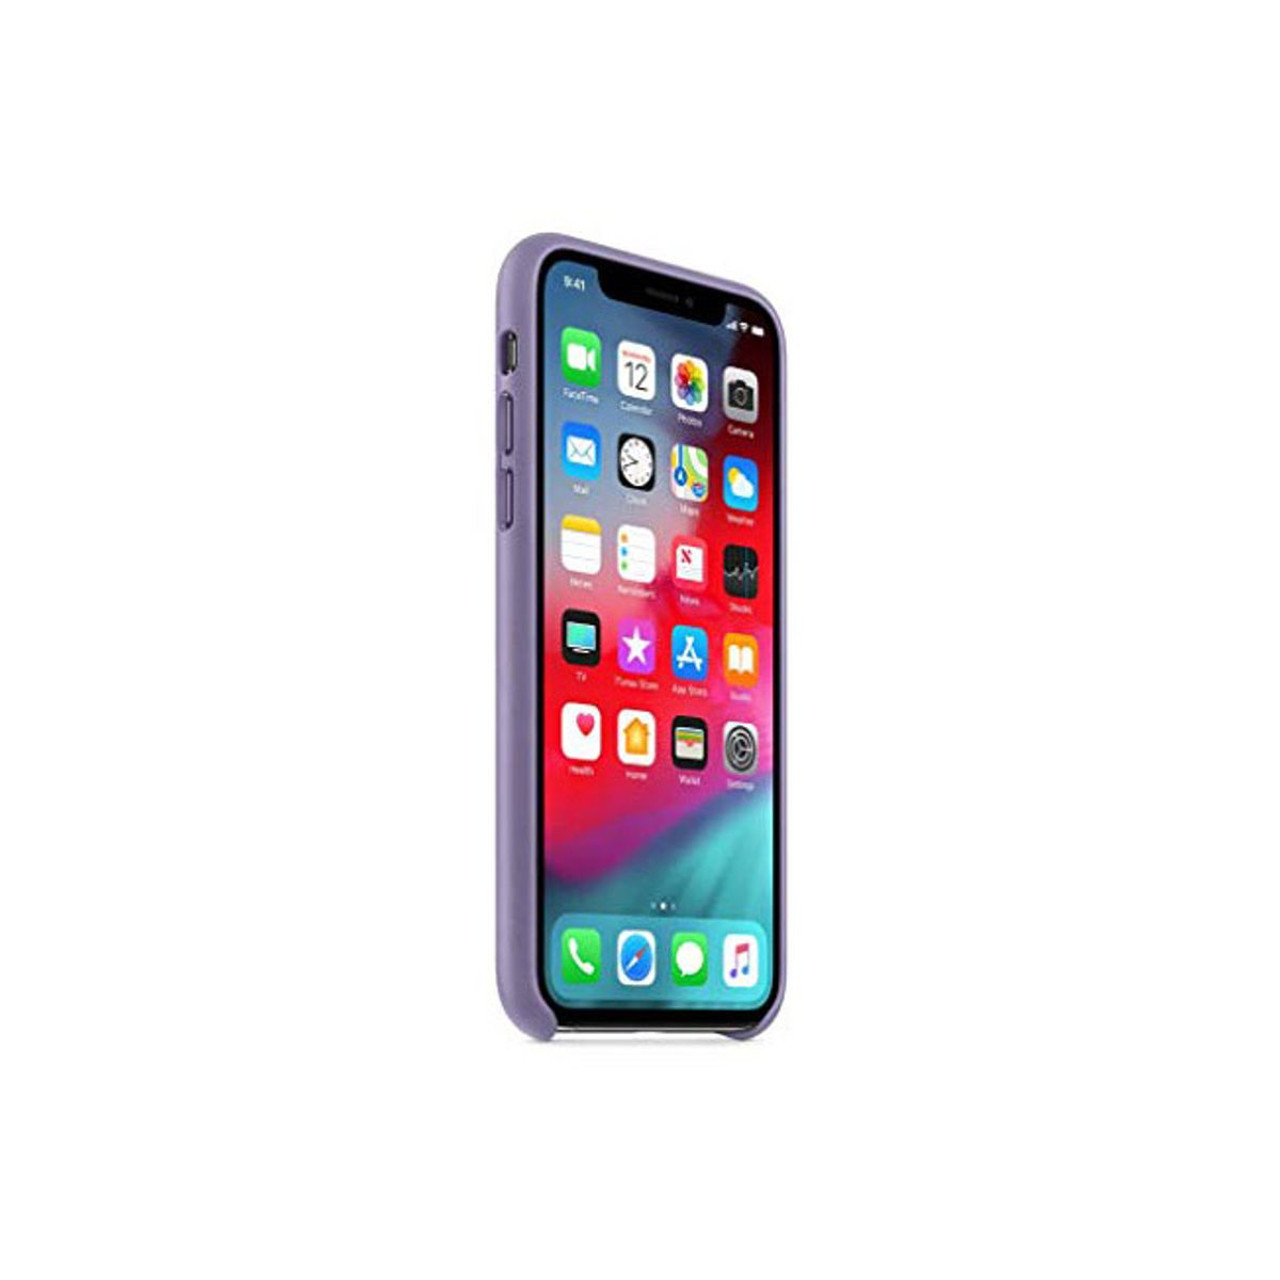 Apple  iPhone XS Leather Case product image